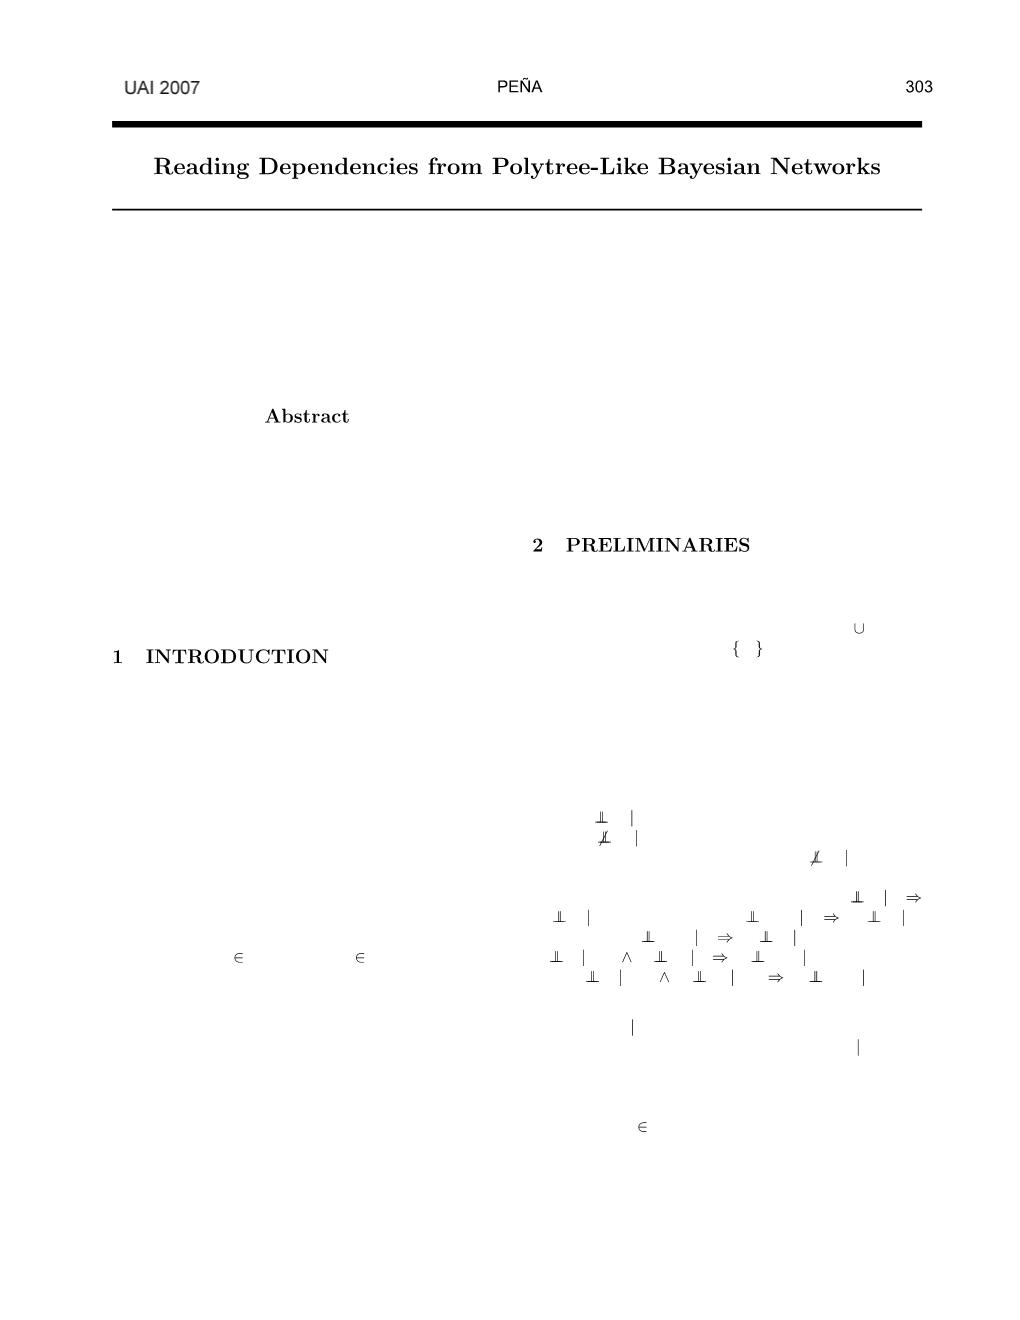 Reading Dependencies from Polytree-Like Bayesian Networks